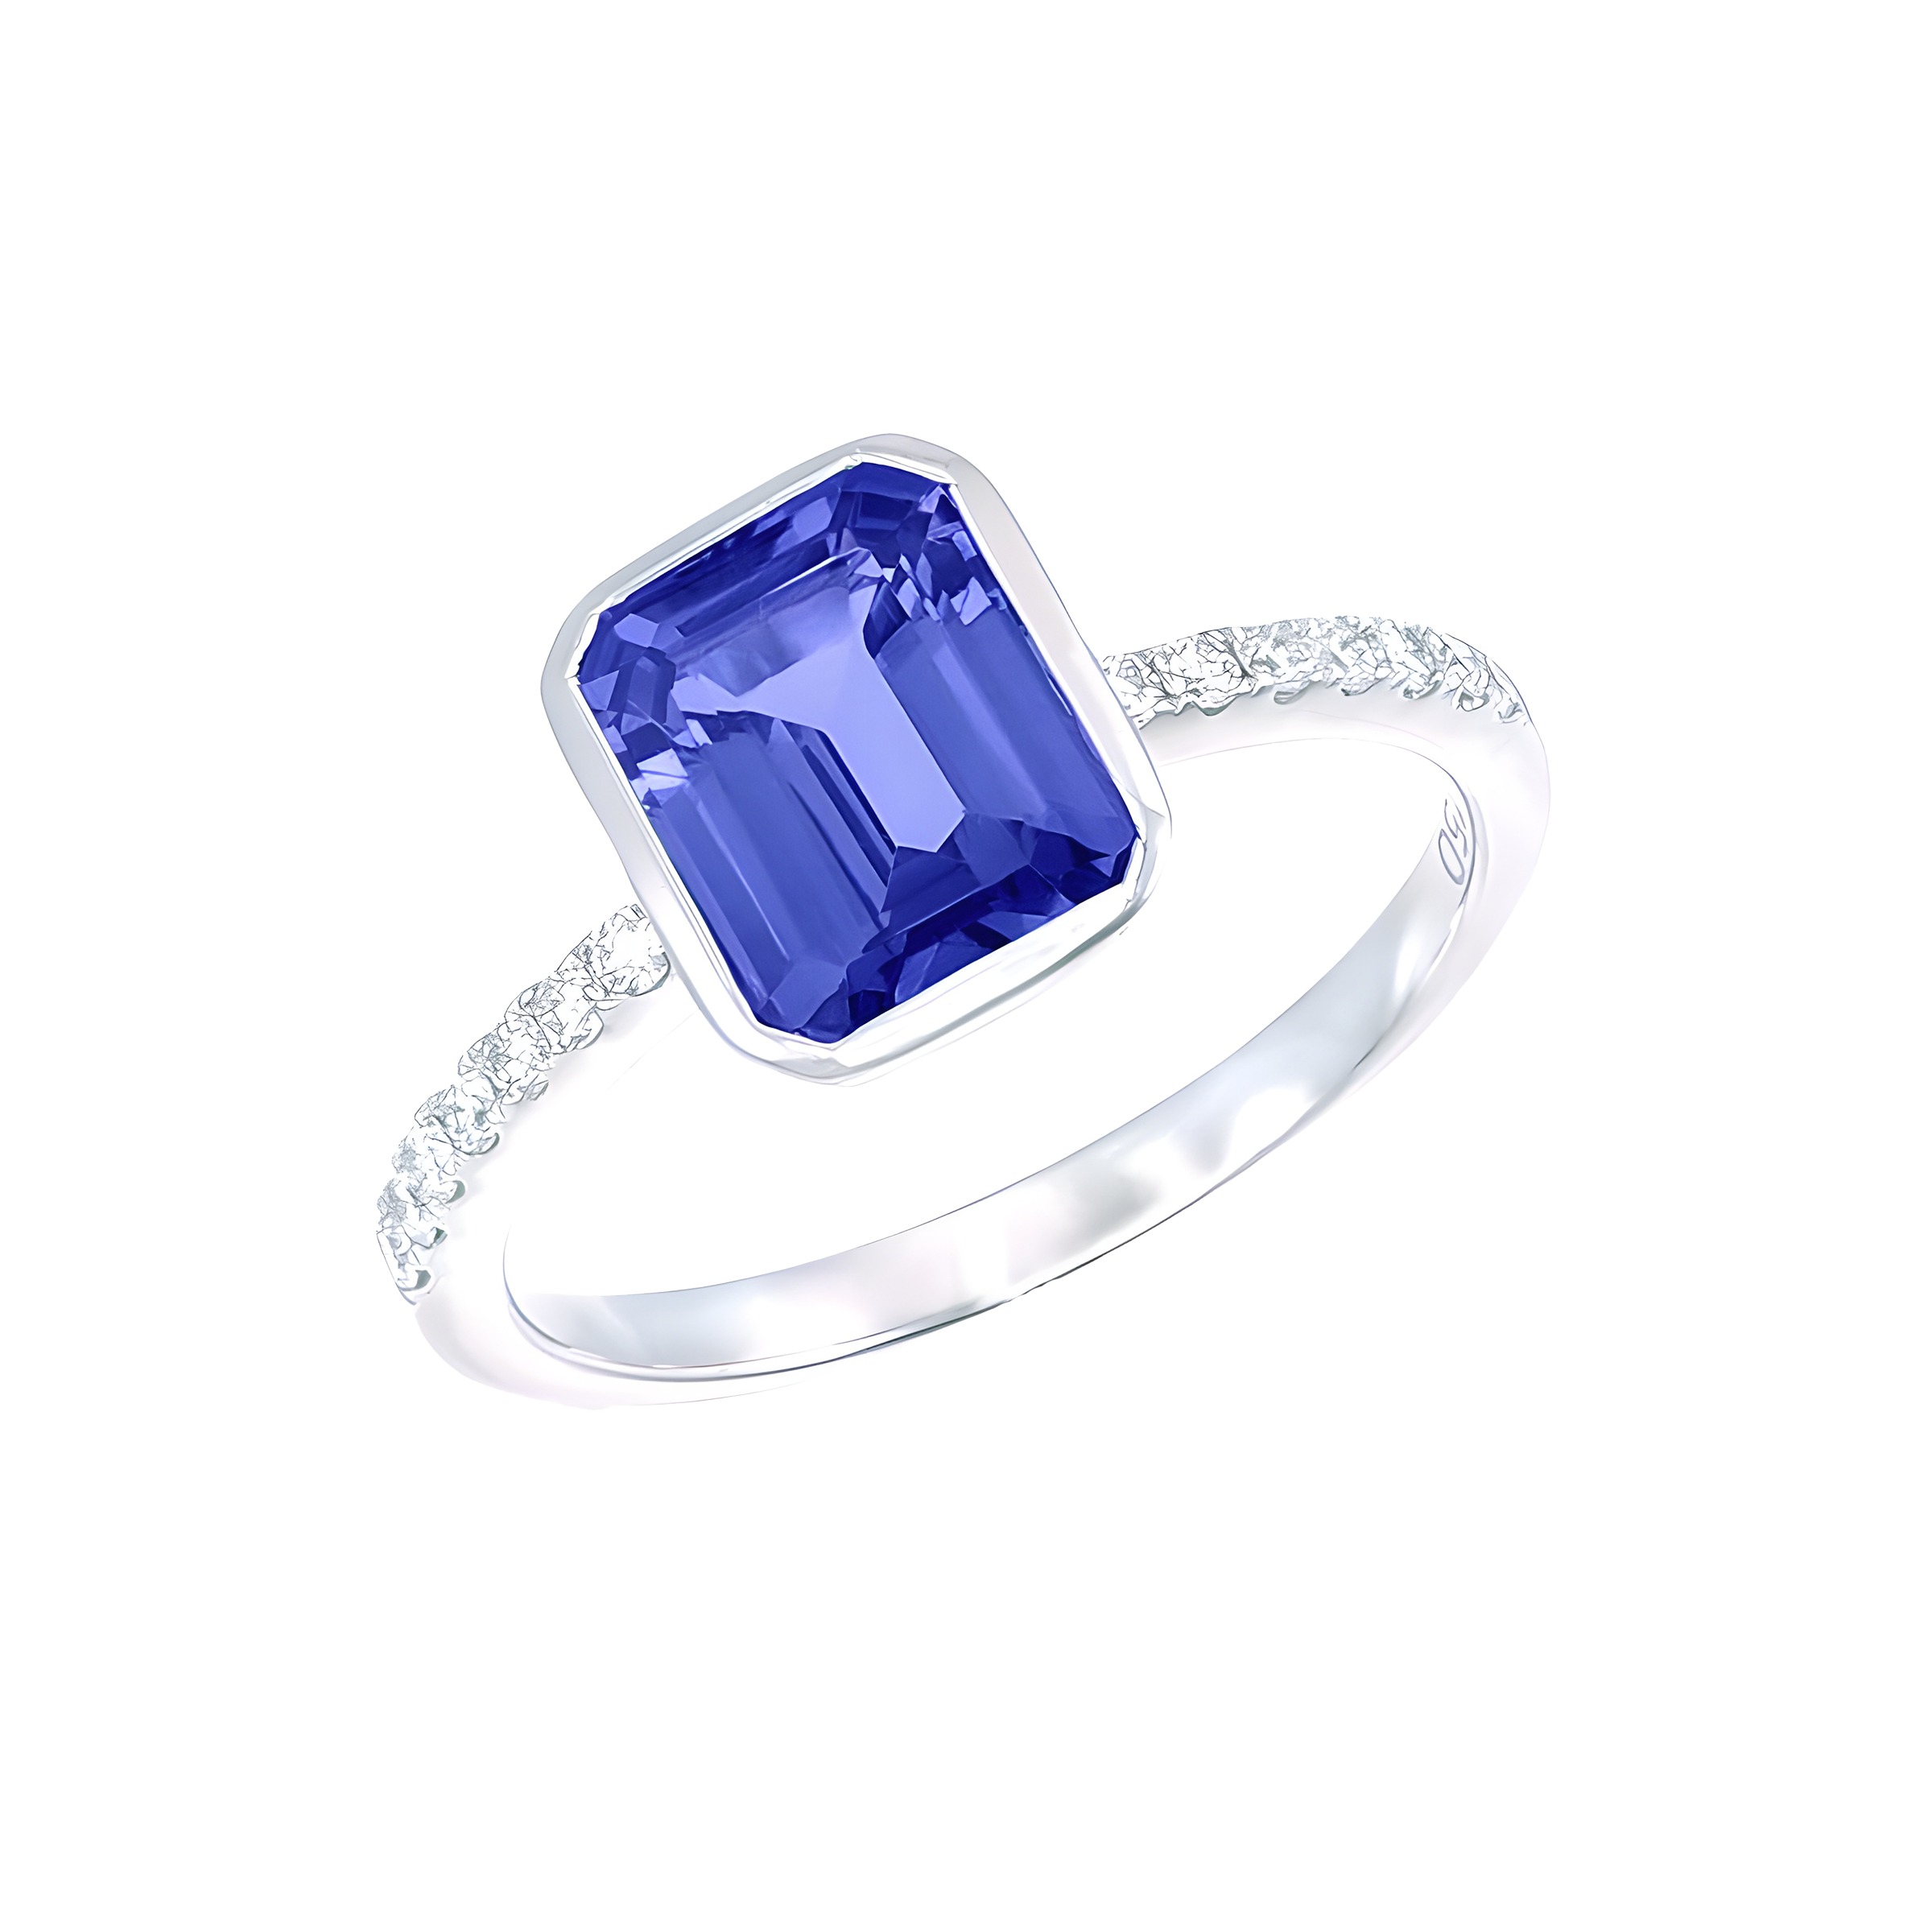 Octagon Tanzanite and Diamond Ring in 18k White Gold